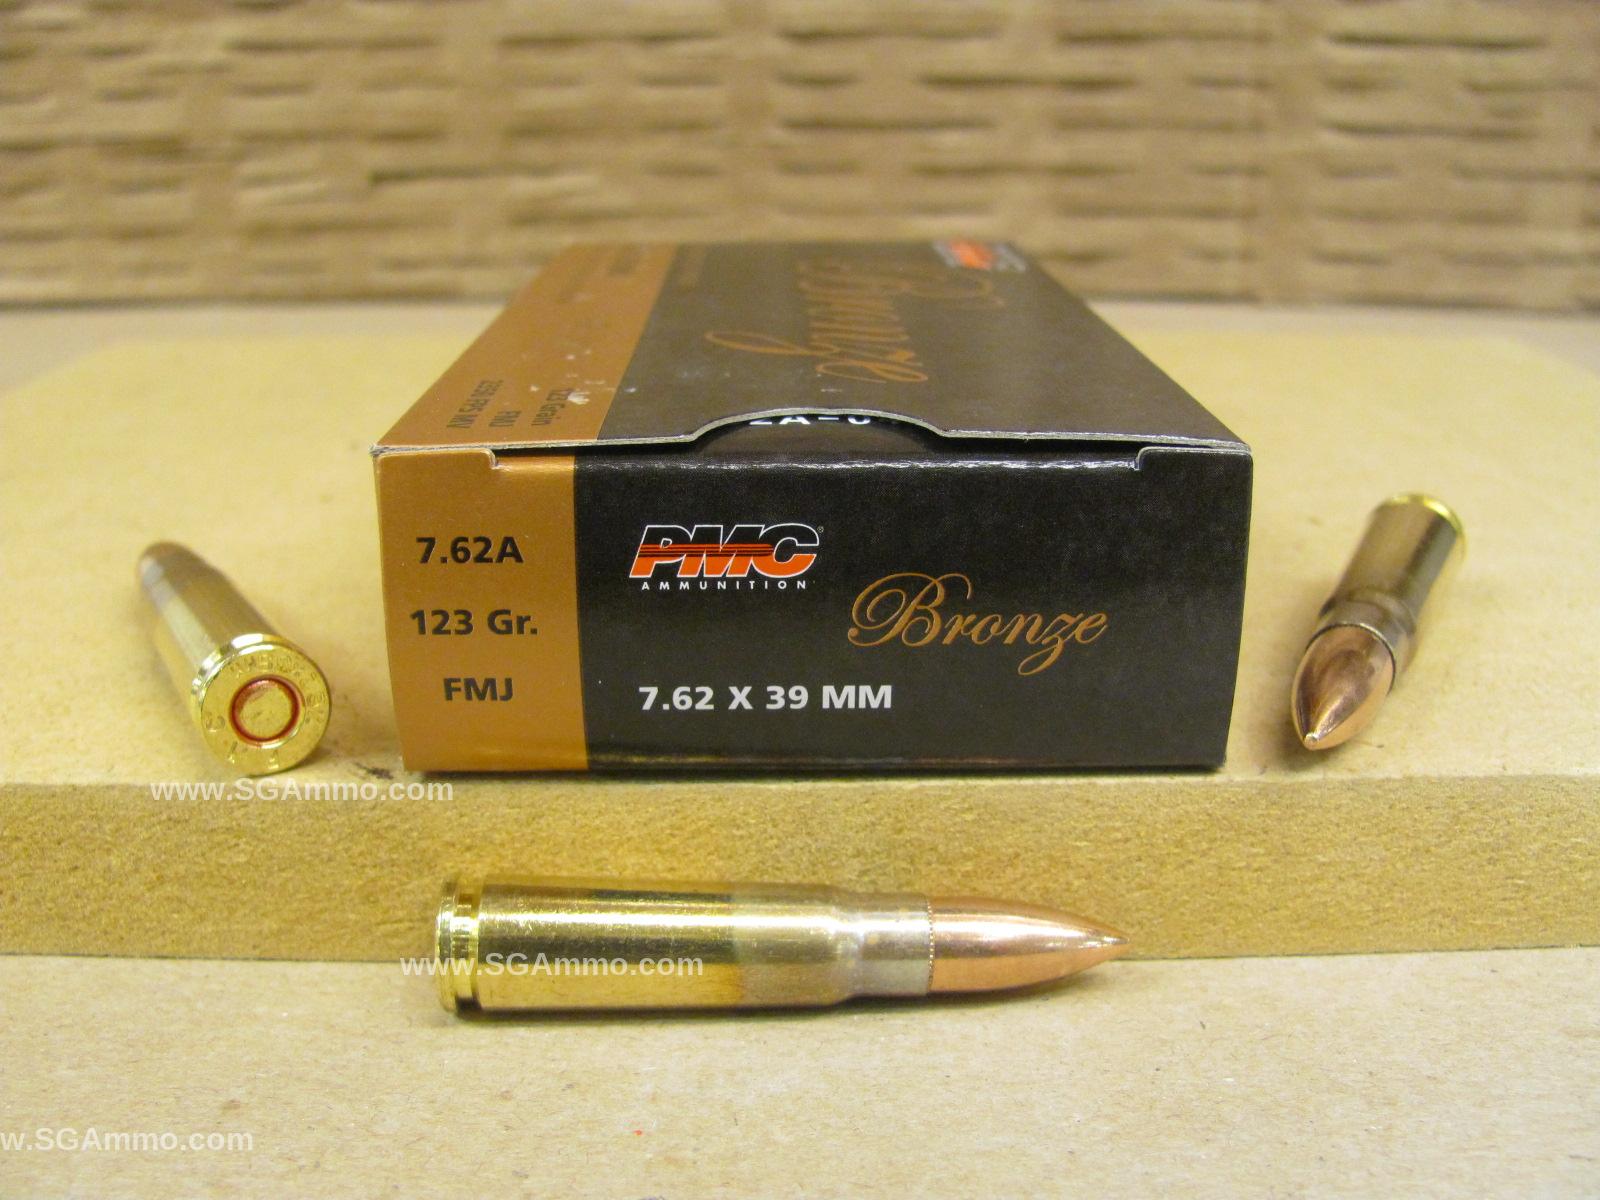 PMC 7.62x39mm Brass Case Ammo - 123 gr FMJ (7.62A) - 500 Rounds